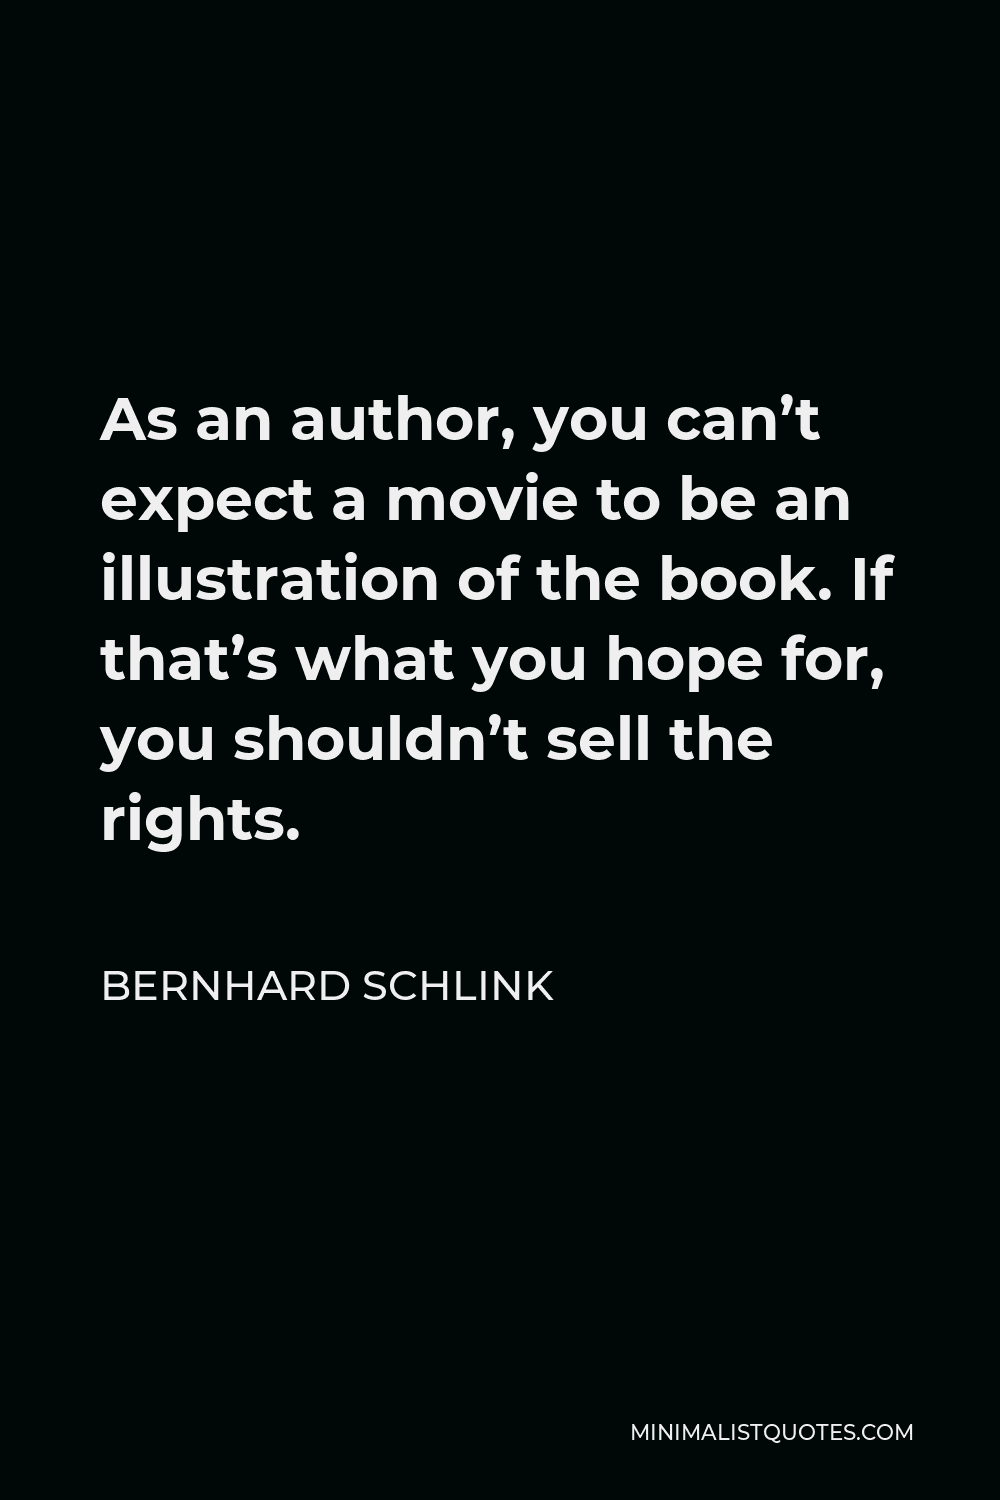 Bernhard Schlink Quote - As an author, you can’t expect a movie to be an illustration of the book. If that’s what you hope for, you shouldn’t sell the rights.